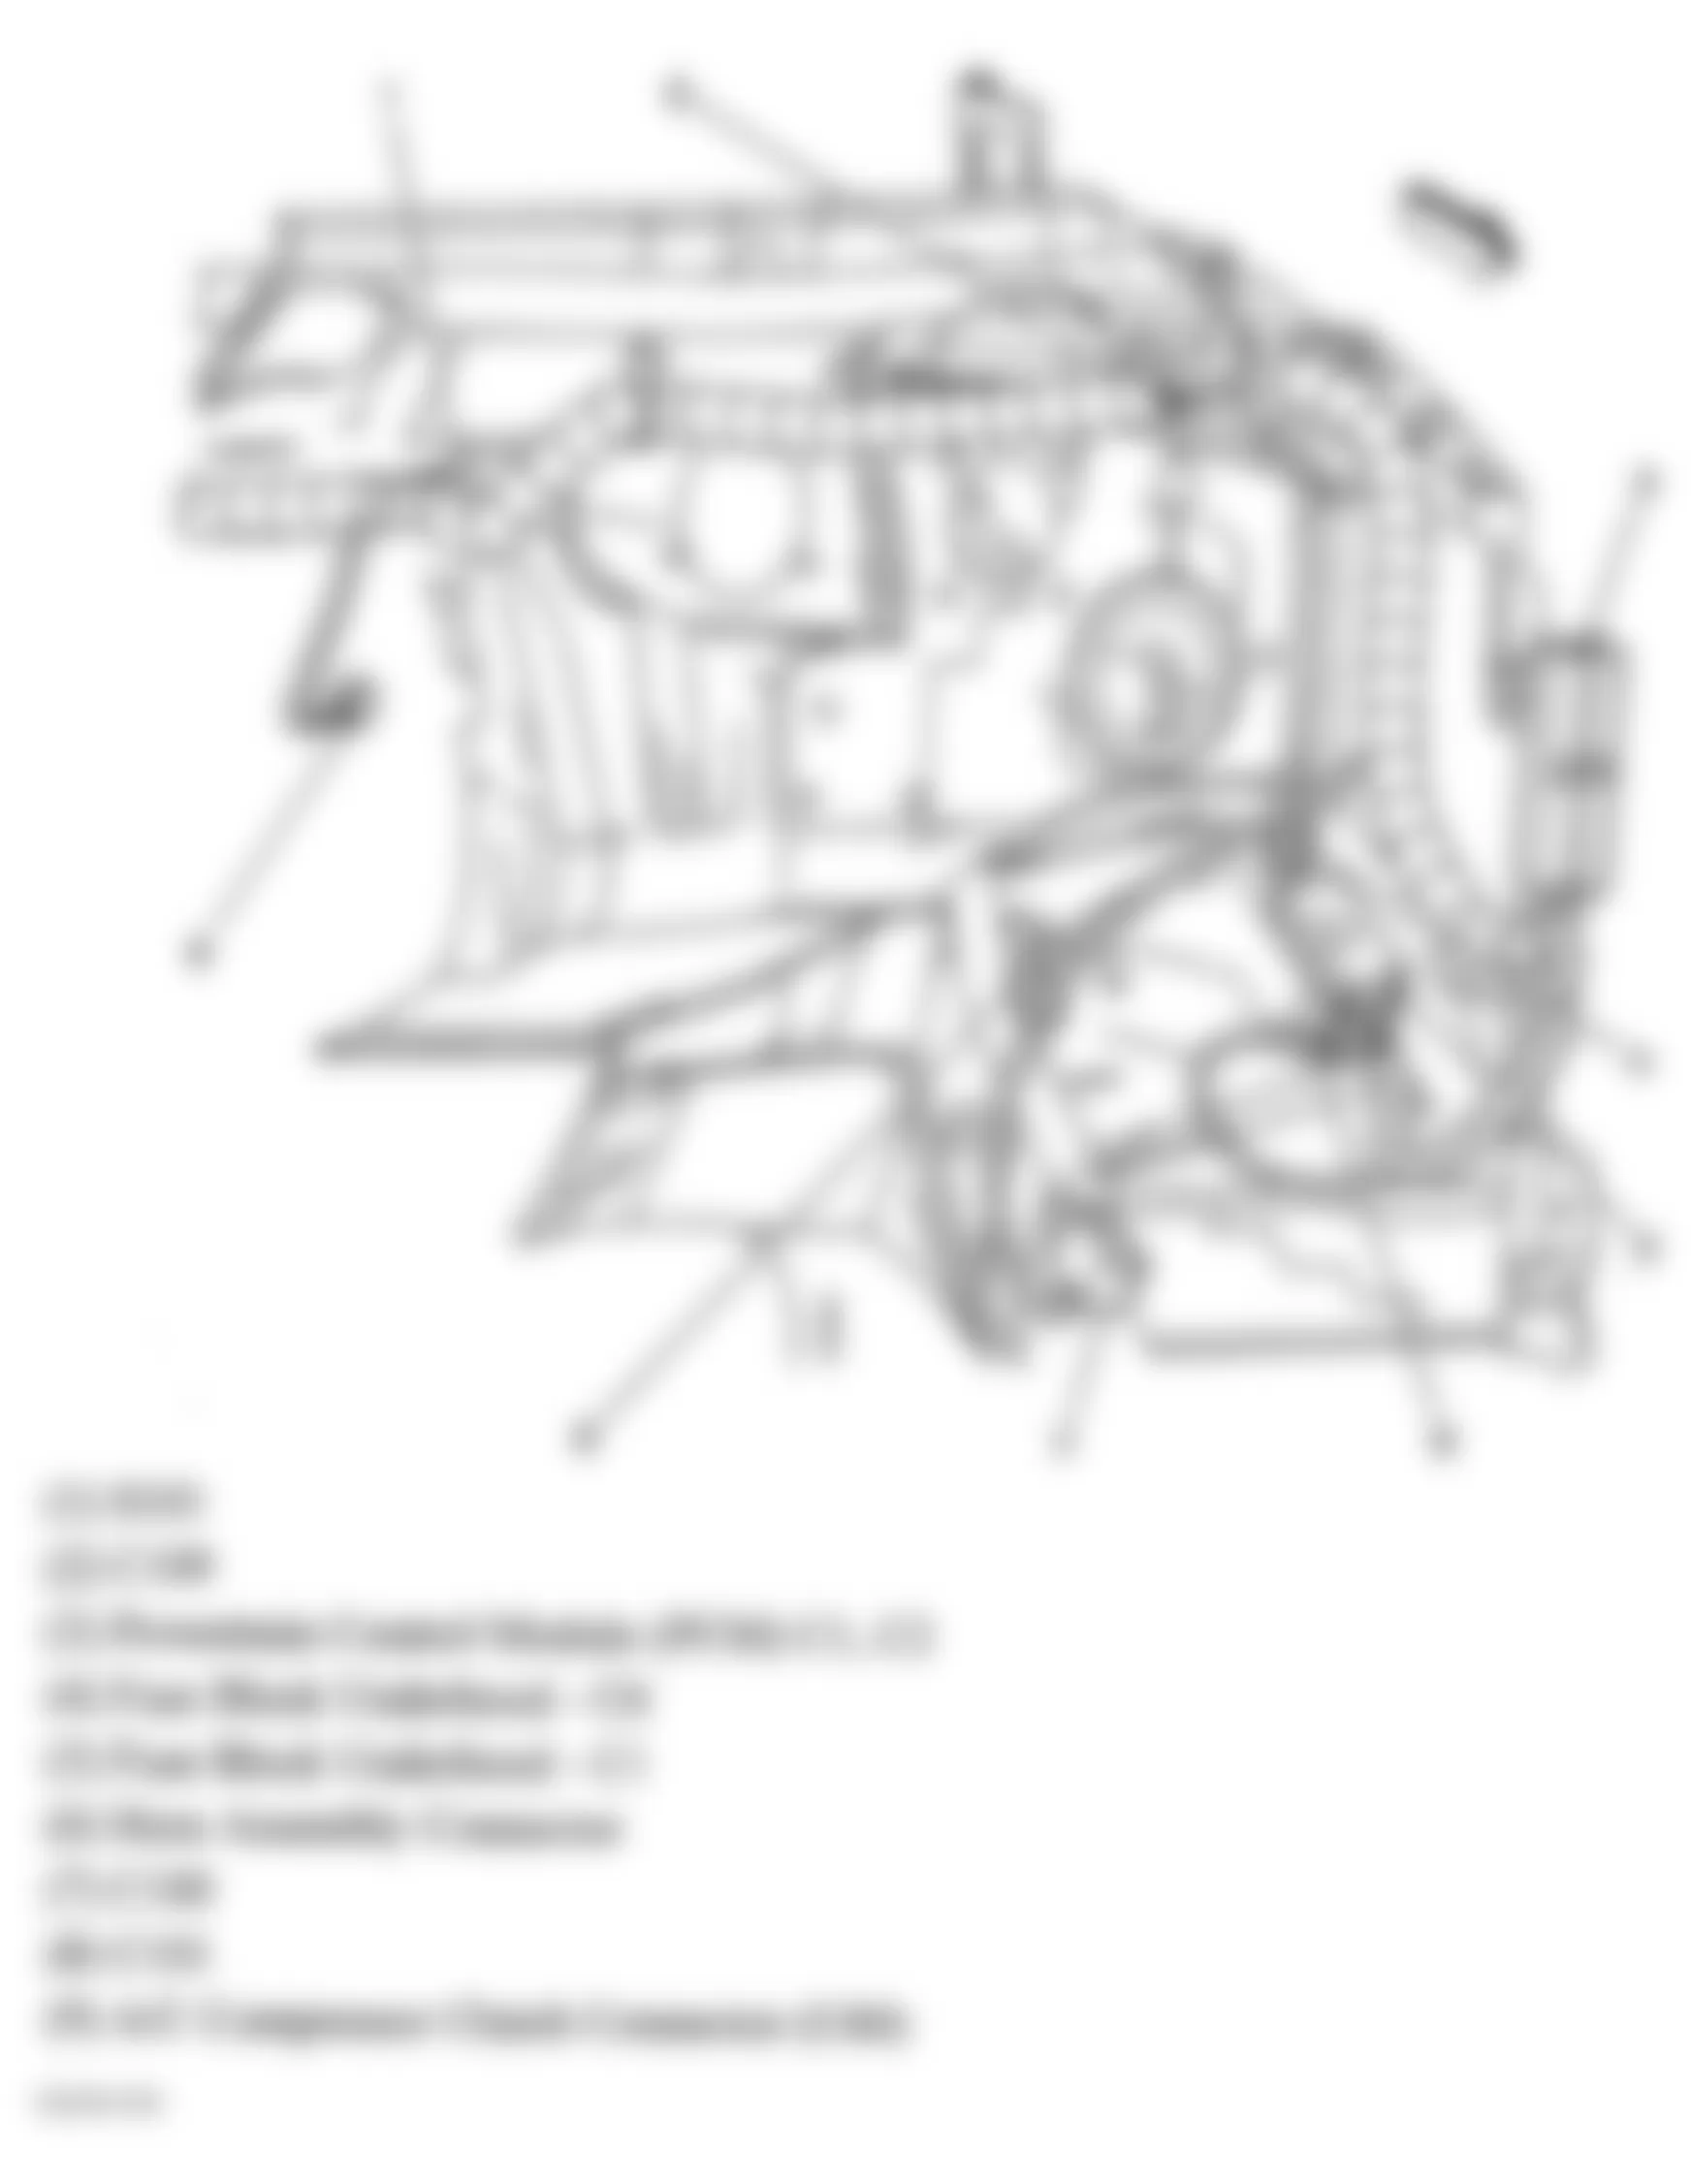 GMC Savana G2500 2005 - Component Locations -  Left Rear Of Engine Compartment